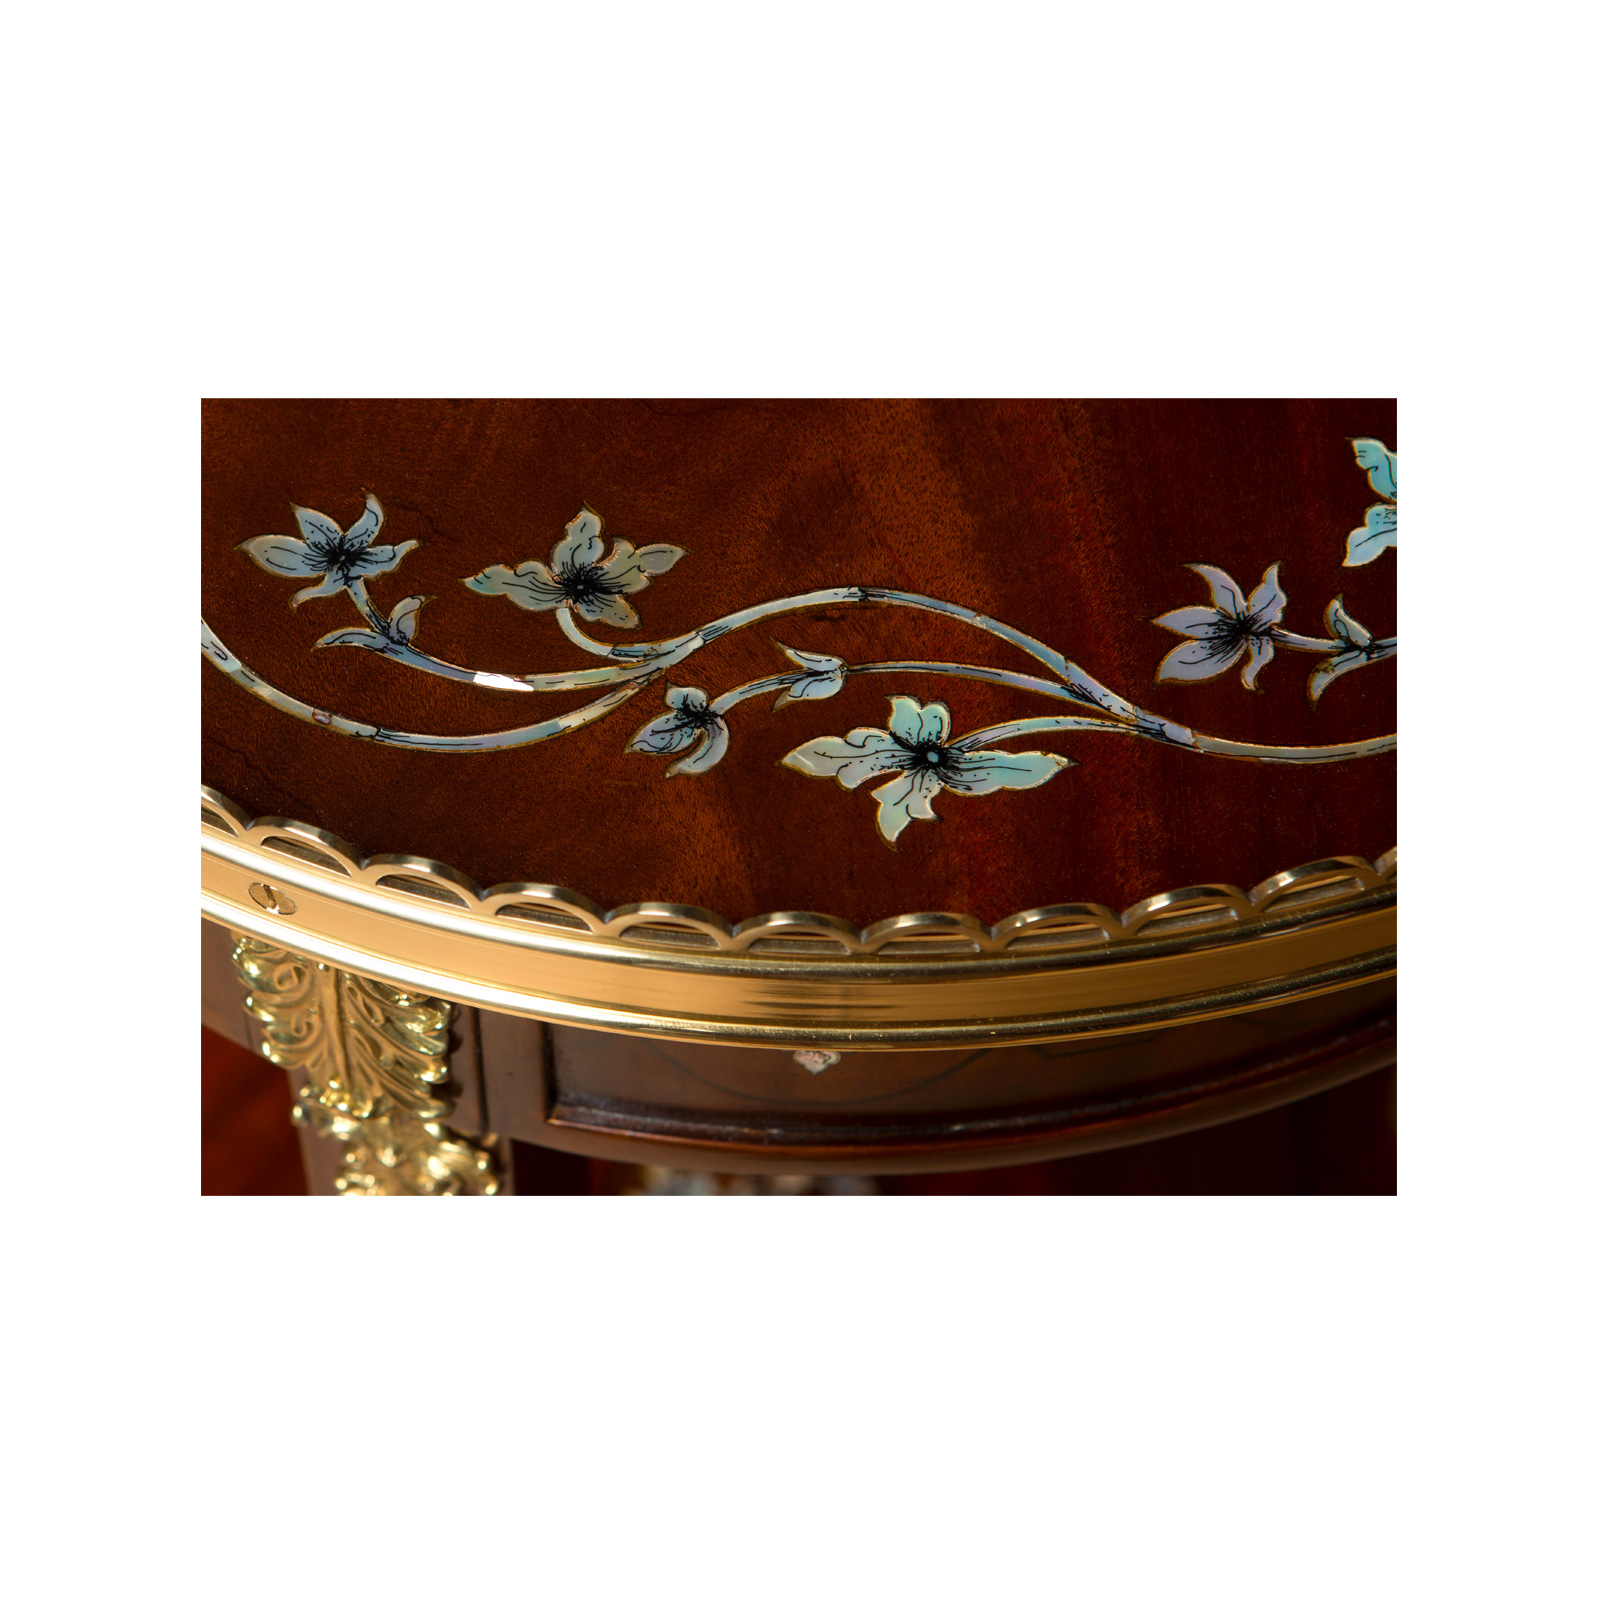 Pain staking attention to detail is required for this stunning floral design created by the use of Mother of Pearl inlays, all done by hand.